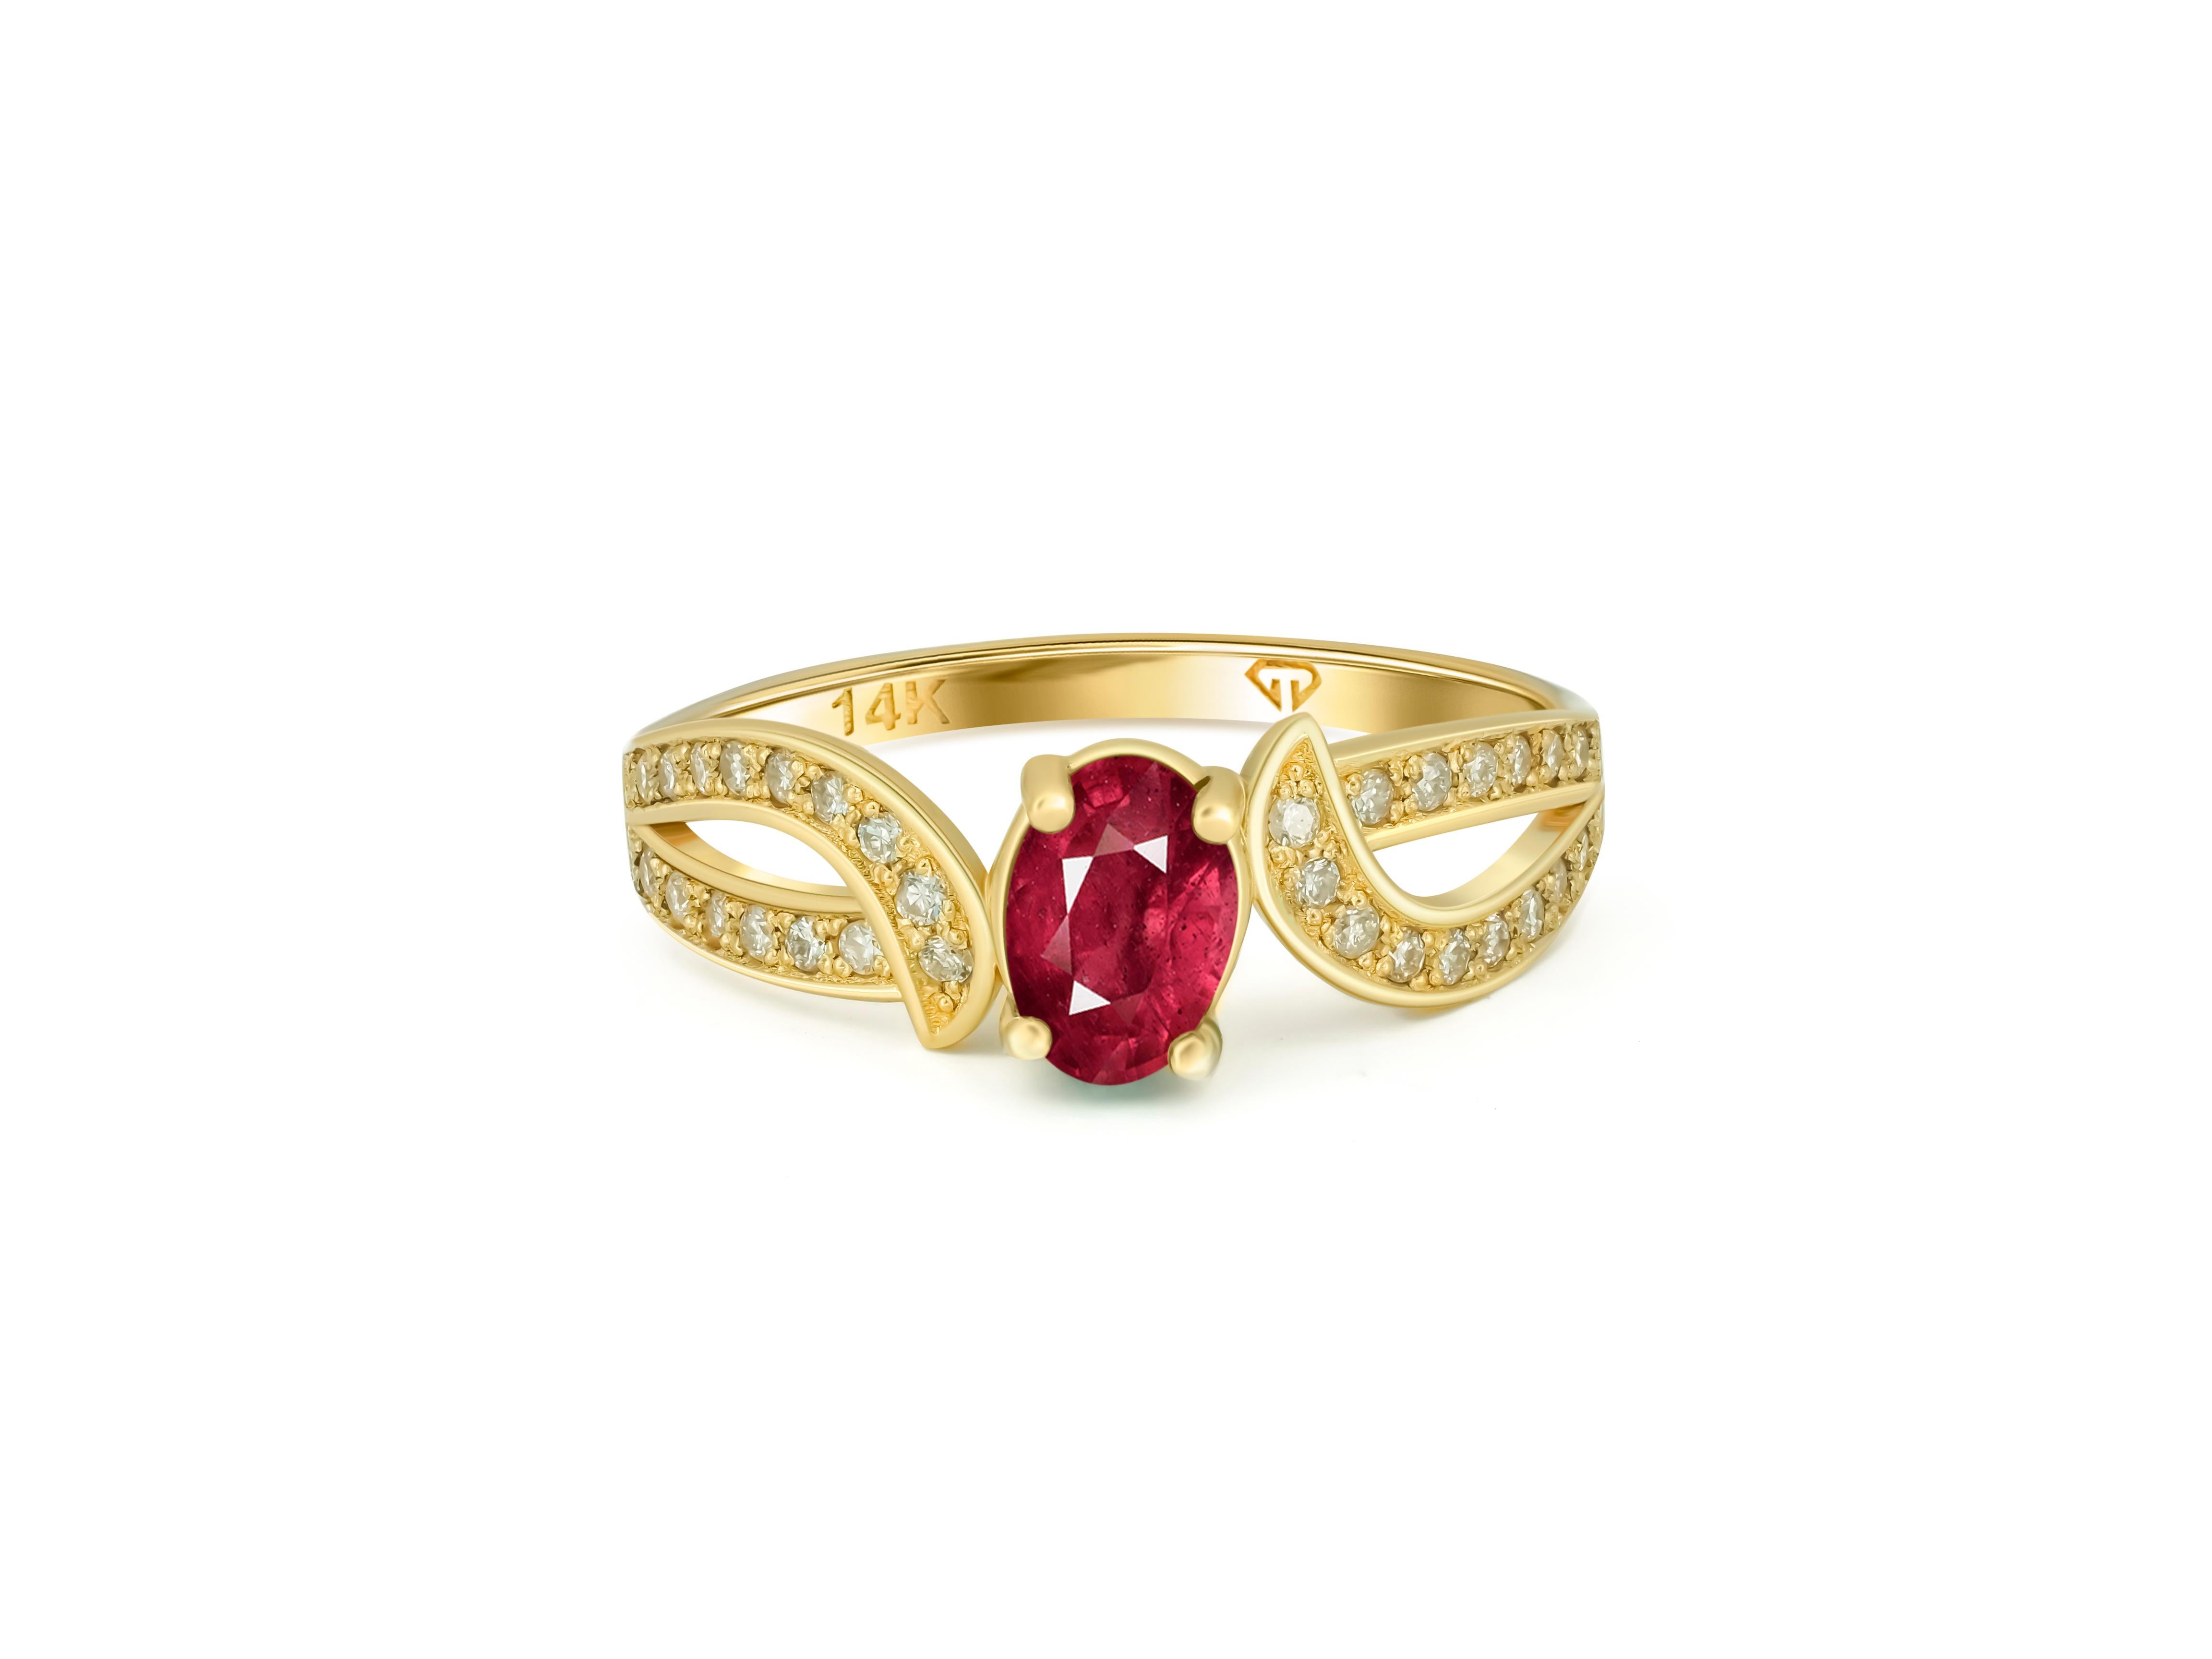 Genuine ruby 14k gold ring. 
Ruby engagement ring. Ruby vintage ring. Ruby gold ring. July birthstone ring.Red gemstone ring.

Metal: 14kt solid gold
Total weight: 2 gr. (depends from size)

Central gemstone: natural ruby
Color: red
Oval cut, 0.80